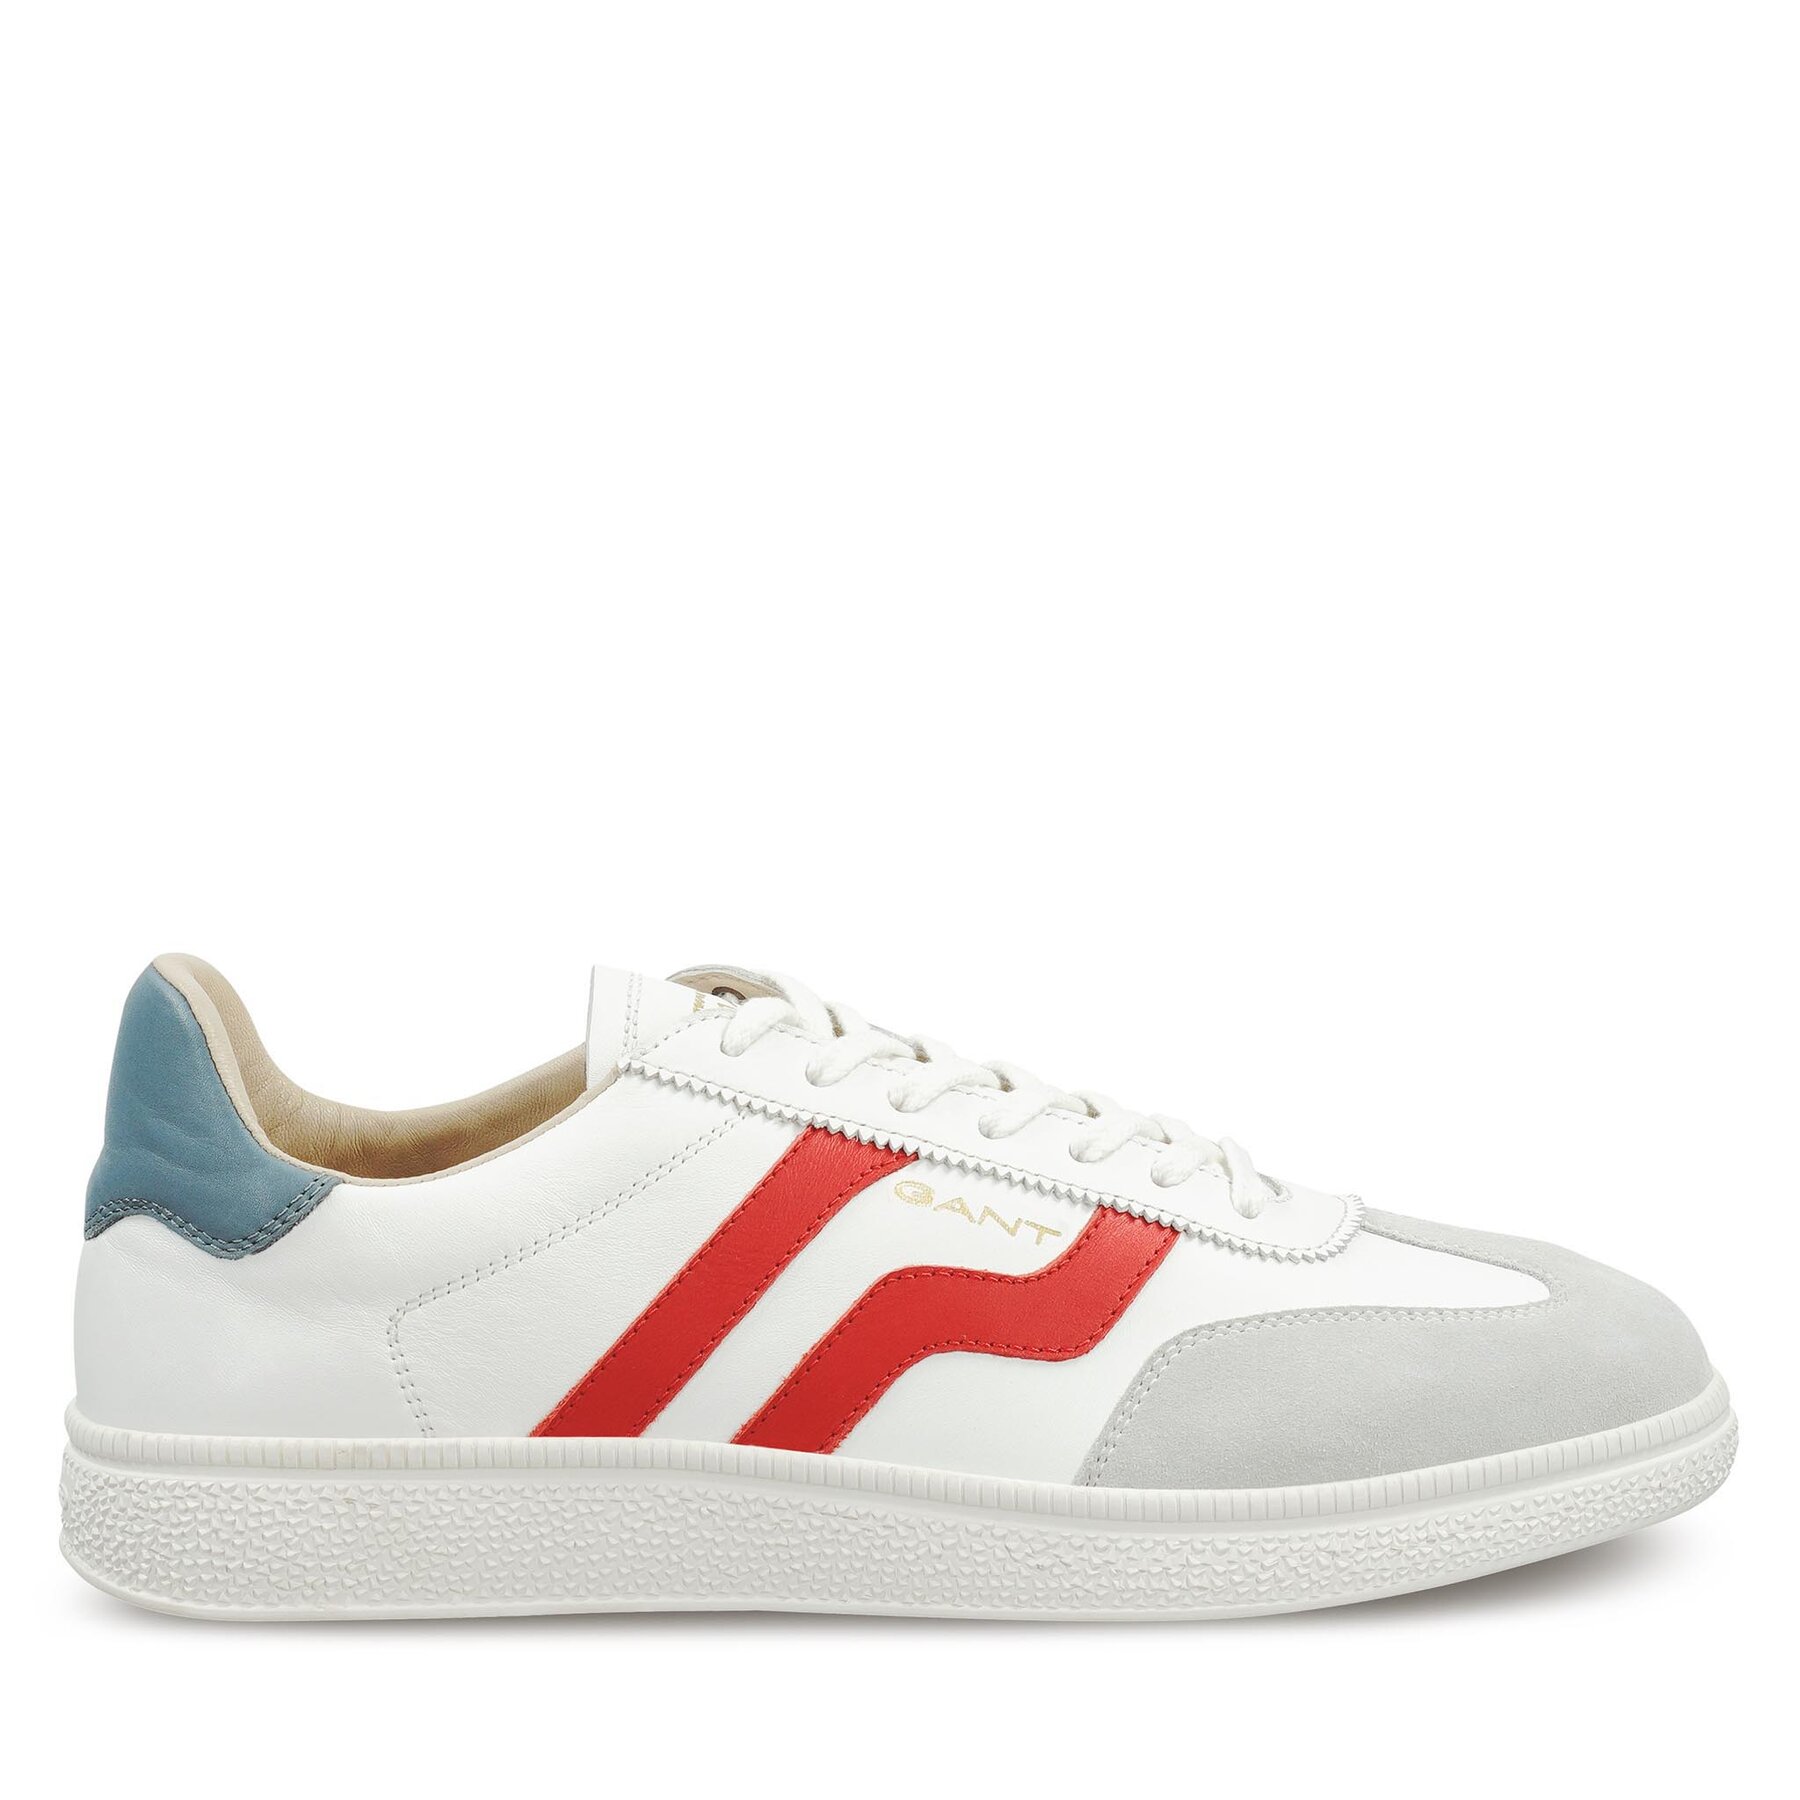 Superge Gant Cuzmo Sneaker 28631482 White/Red G238